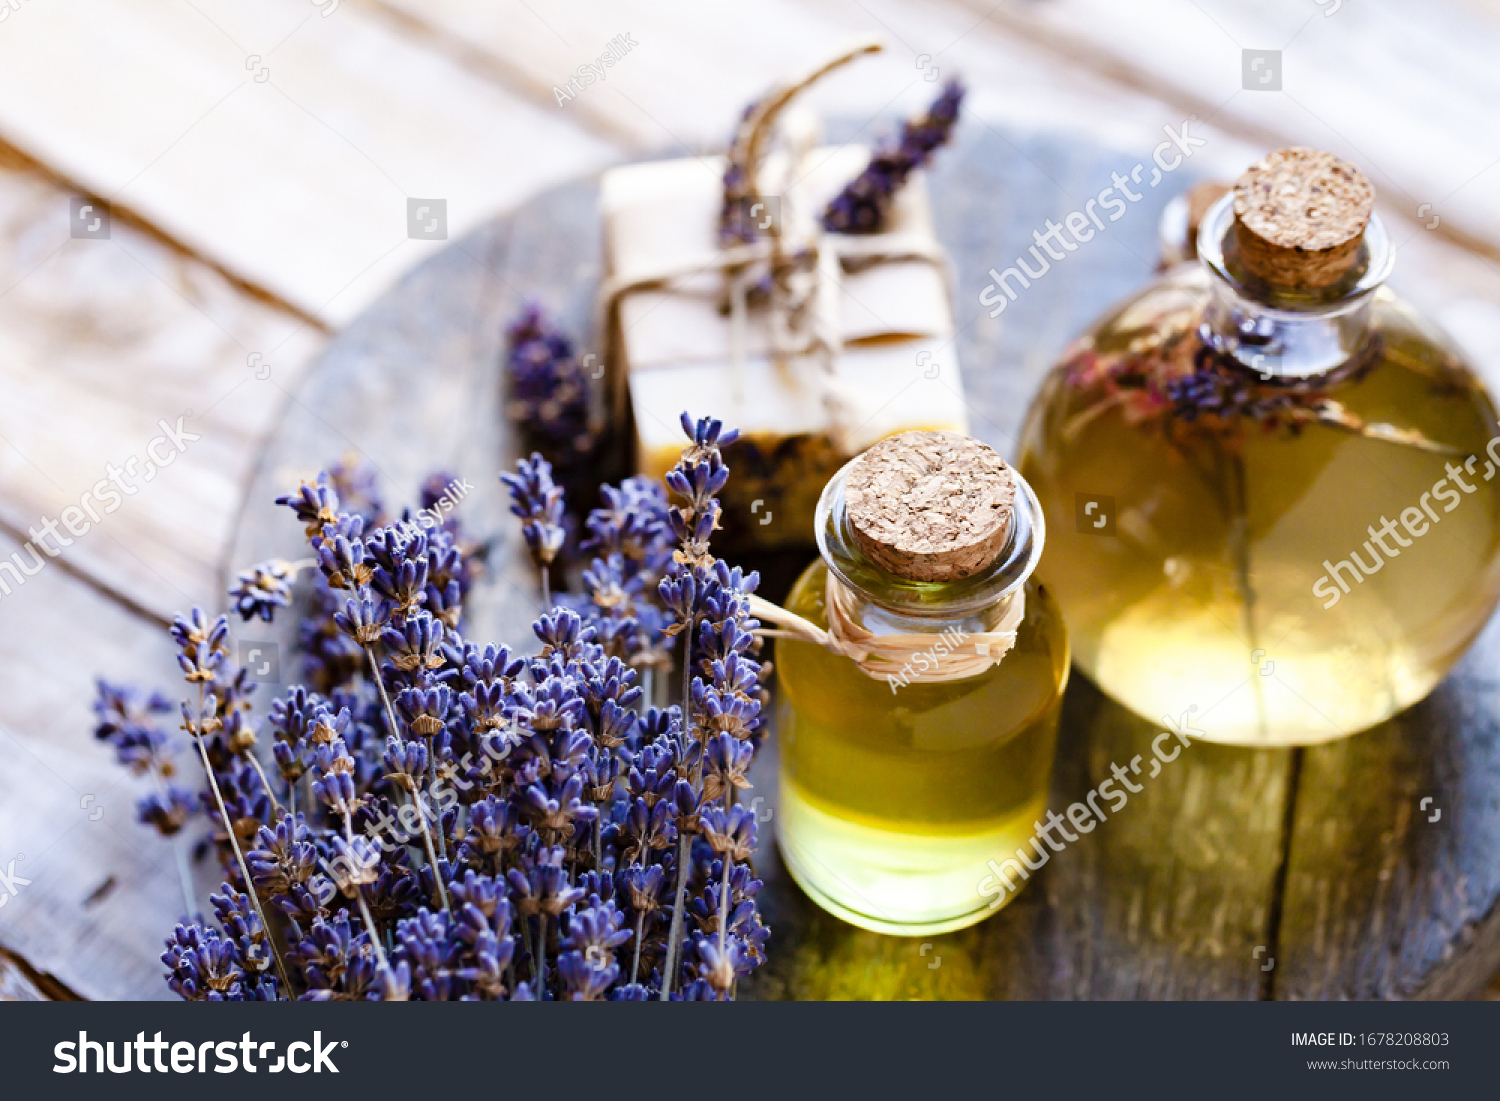 Concept of natural organic oil in cosmetology. Moisturizing skin care and aromatherapy. Gentle body treatment. Handmade soap. Atmosphere of harmony relax. Wooden background, lavender flower copy space #1678208803